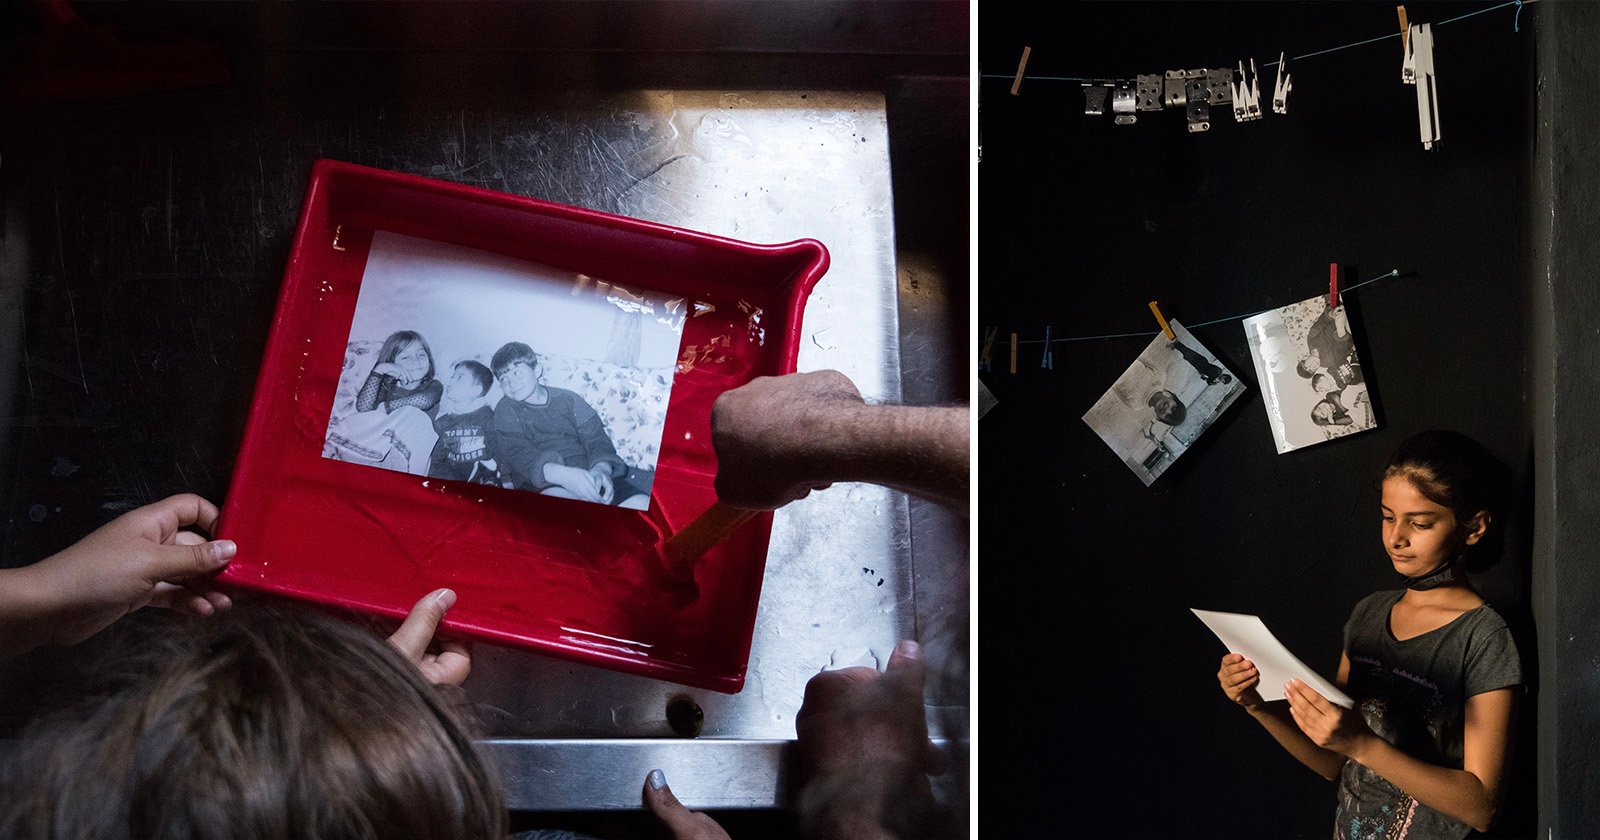 Mobile Classroom Teaches At-Risk Children the Art of Analog Photography